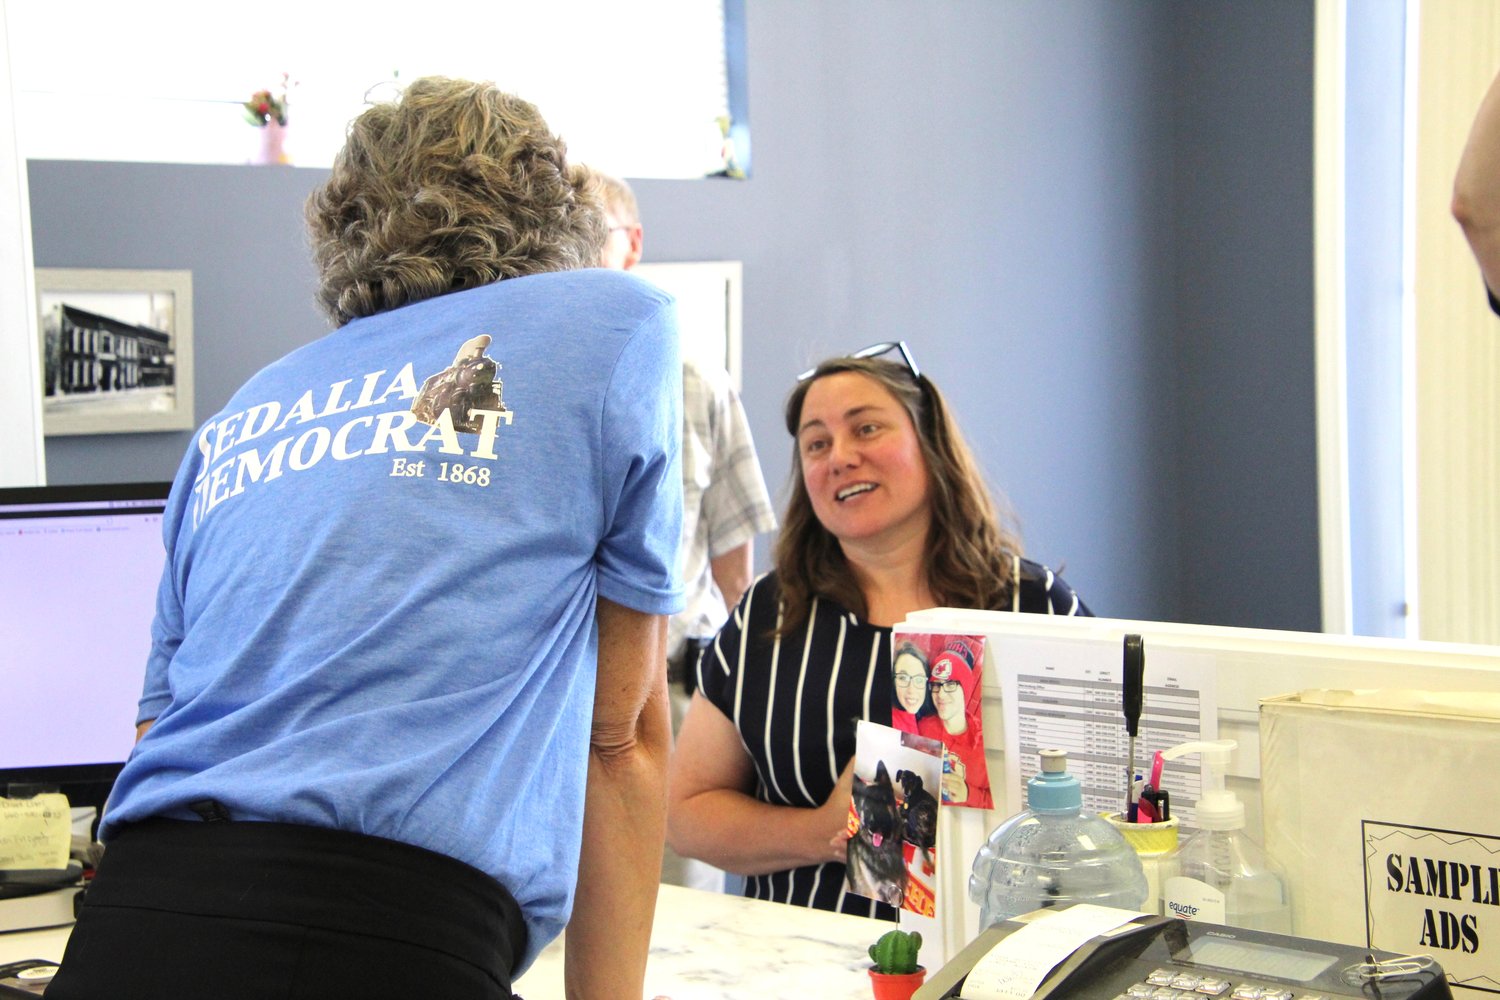 Democrat sales representative Diana Surface speaks with RE/MAX of Sedalia realtor Billie Barnes during the open house.